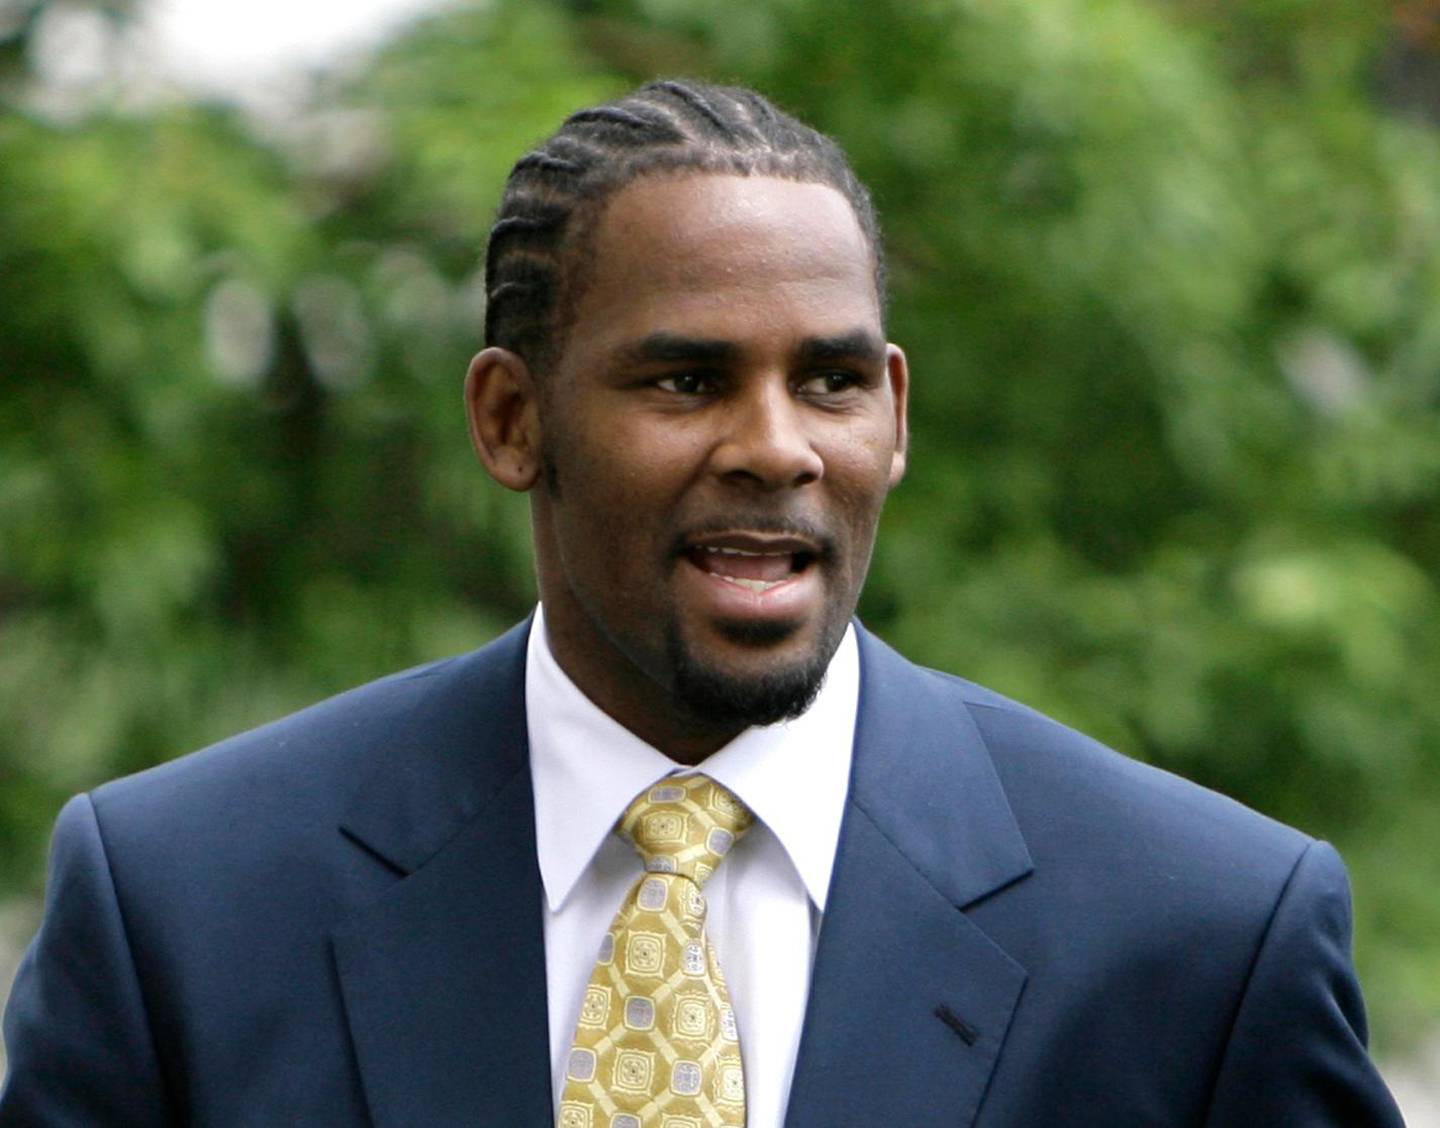 FILE - This June 13, 2008 file photo shows R&B singer R. Kelly arriving at 3the Cook County Criminal Court Building in Chicago. Kelly, one of the top-selling recording artists of all time, has been hounded for years by allegations of sexual misconduct involving women and underage girls _ accusations he and his attorneys have long denied. But an Illinois prosecutorâ€™s plea for potential victims and witnesses to come forward has sparked hope among some advocates that the R&B star might face new charges. (AP Photo/M. Spencer Green, File)